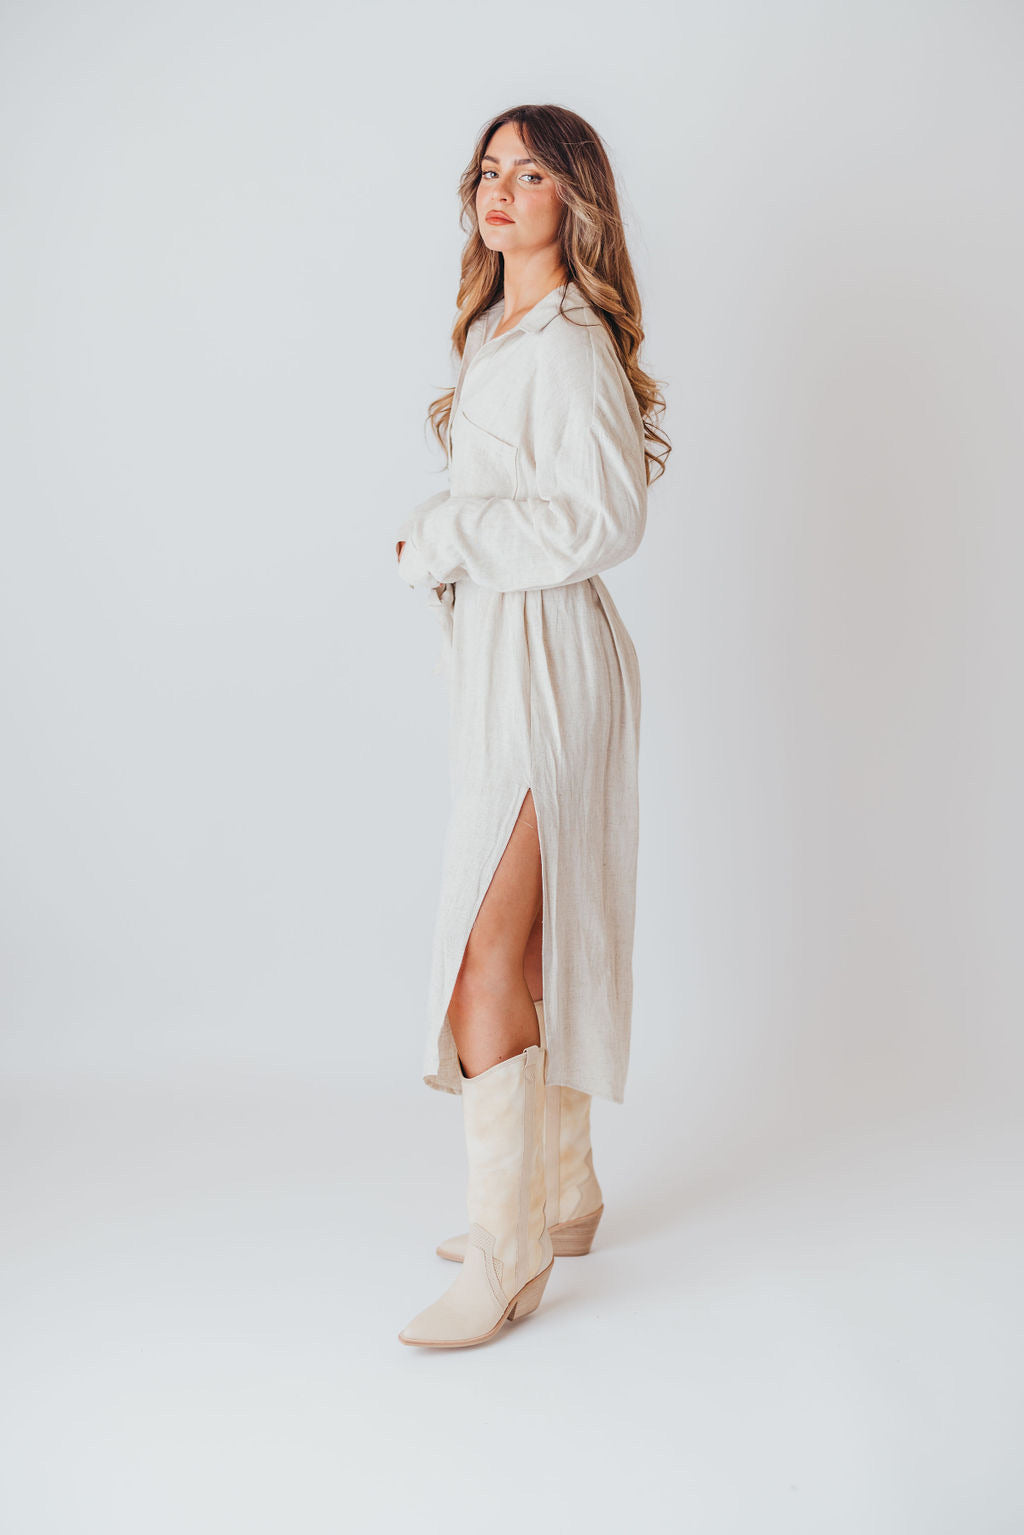 Navene Boots in Ivory